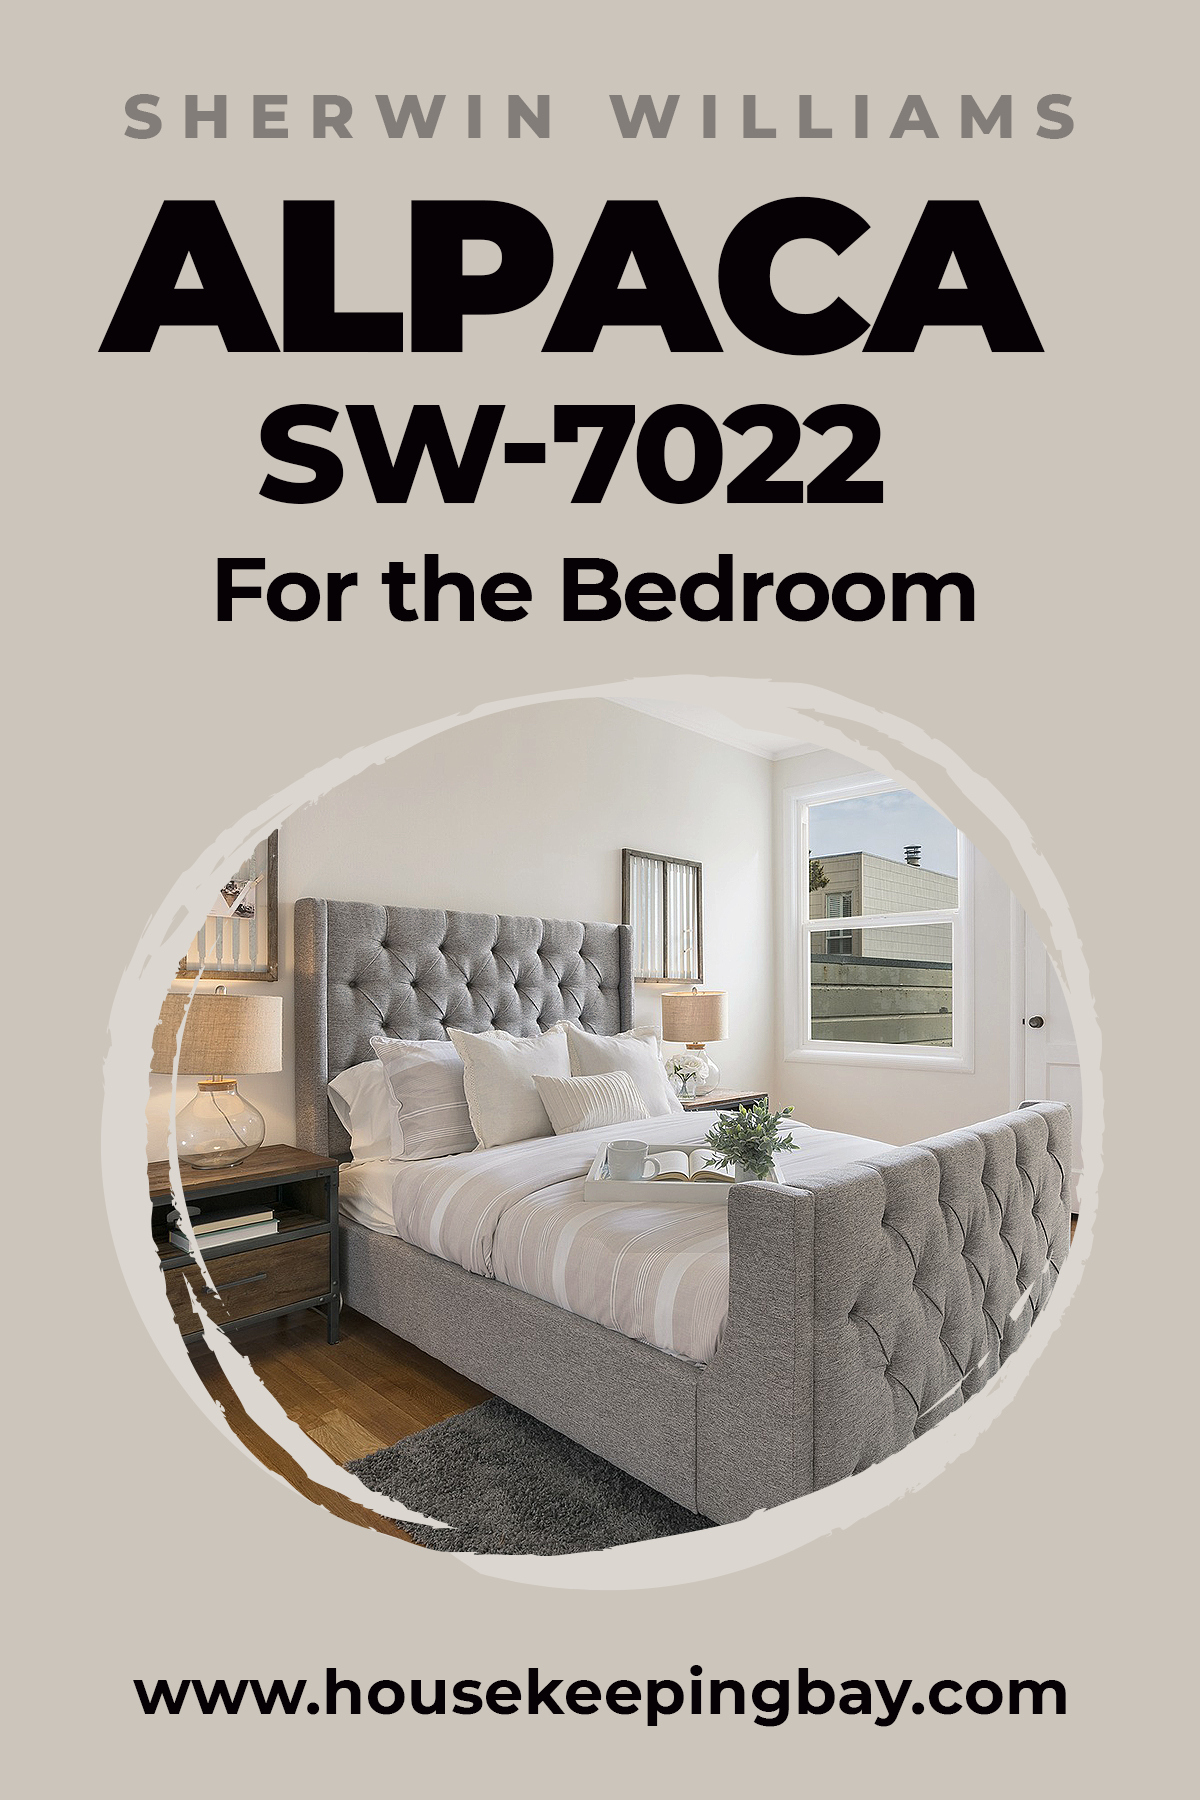 Alpaca SW 7022 By Sherwin Williams for the bedroom